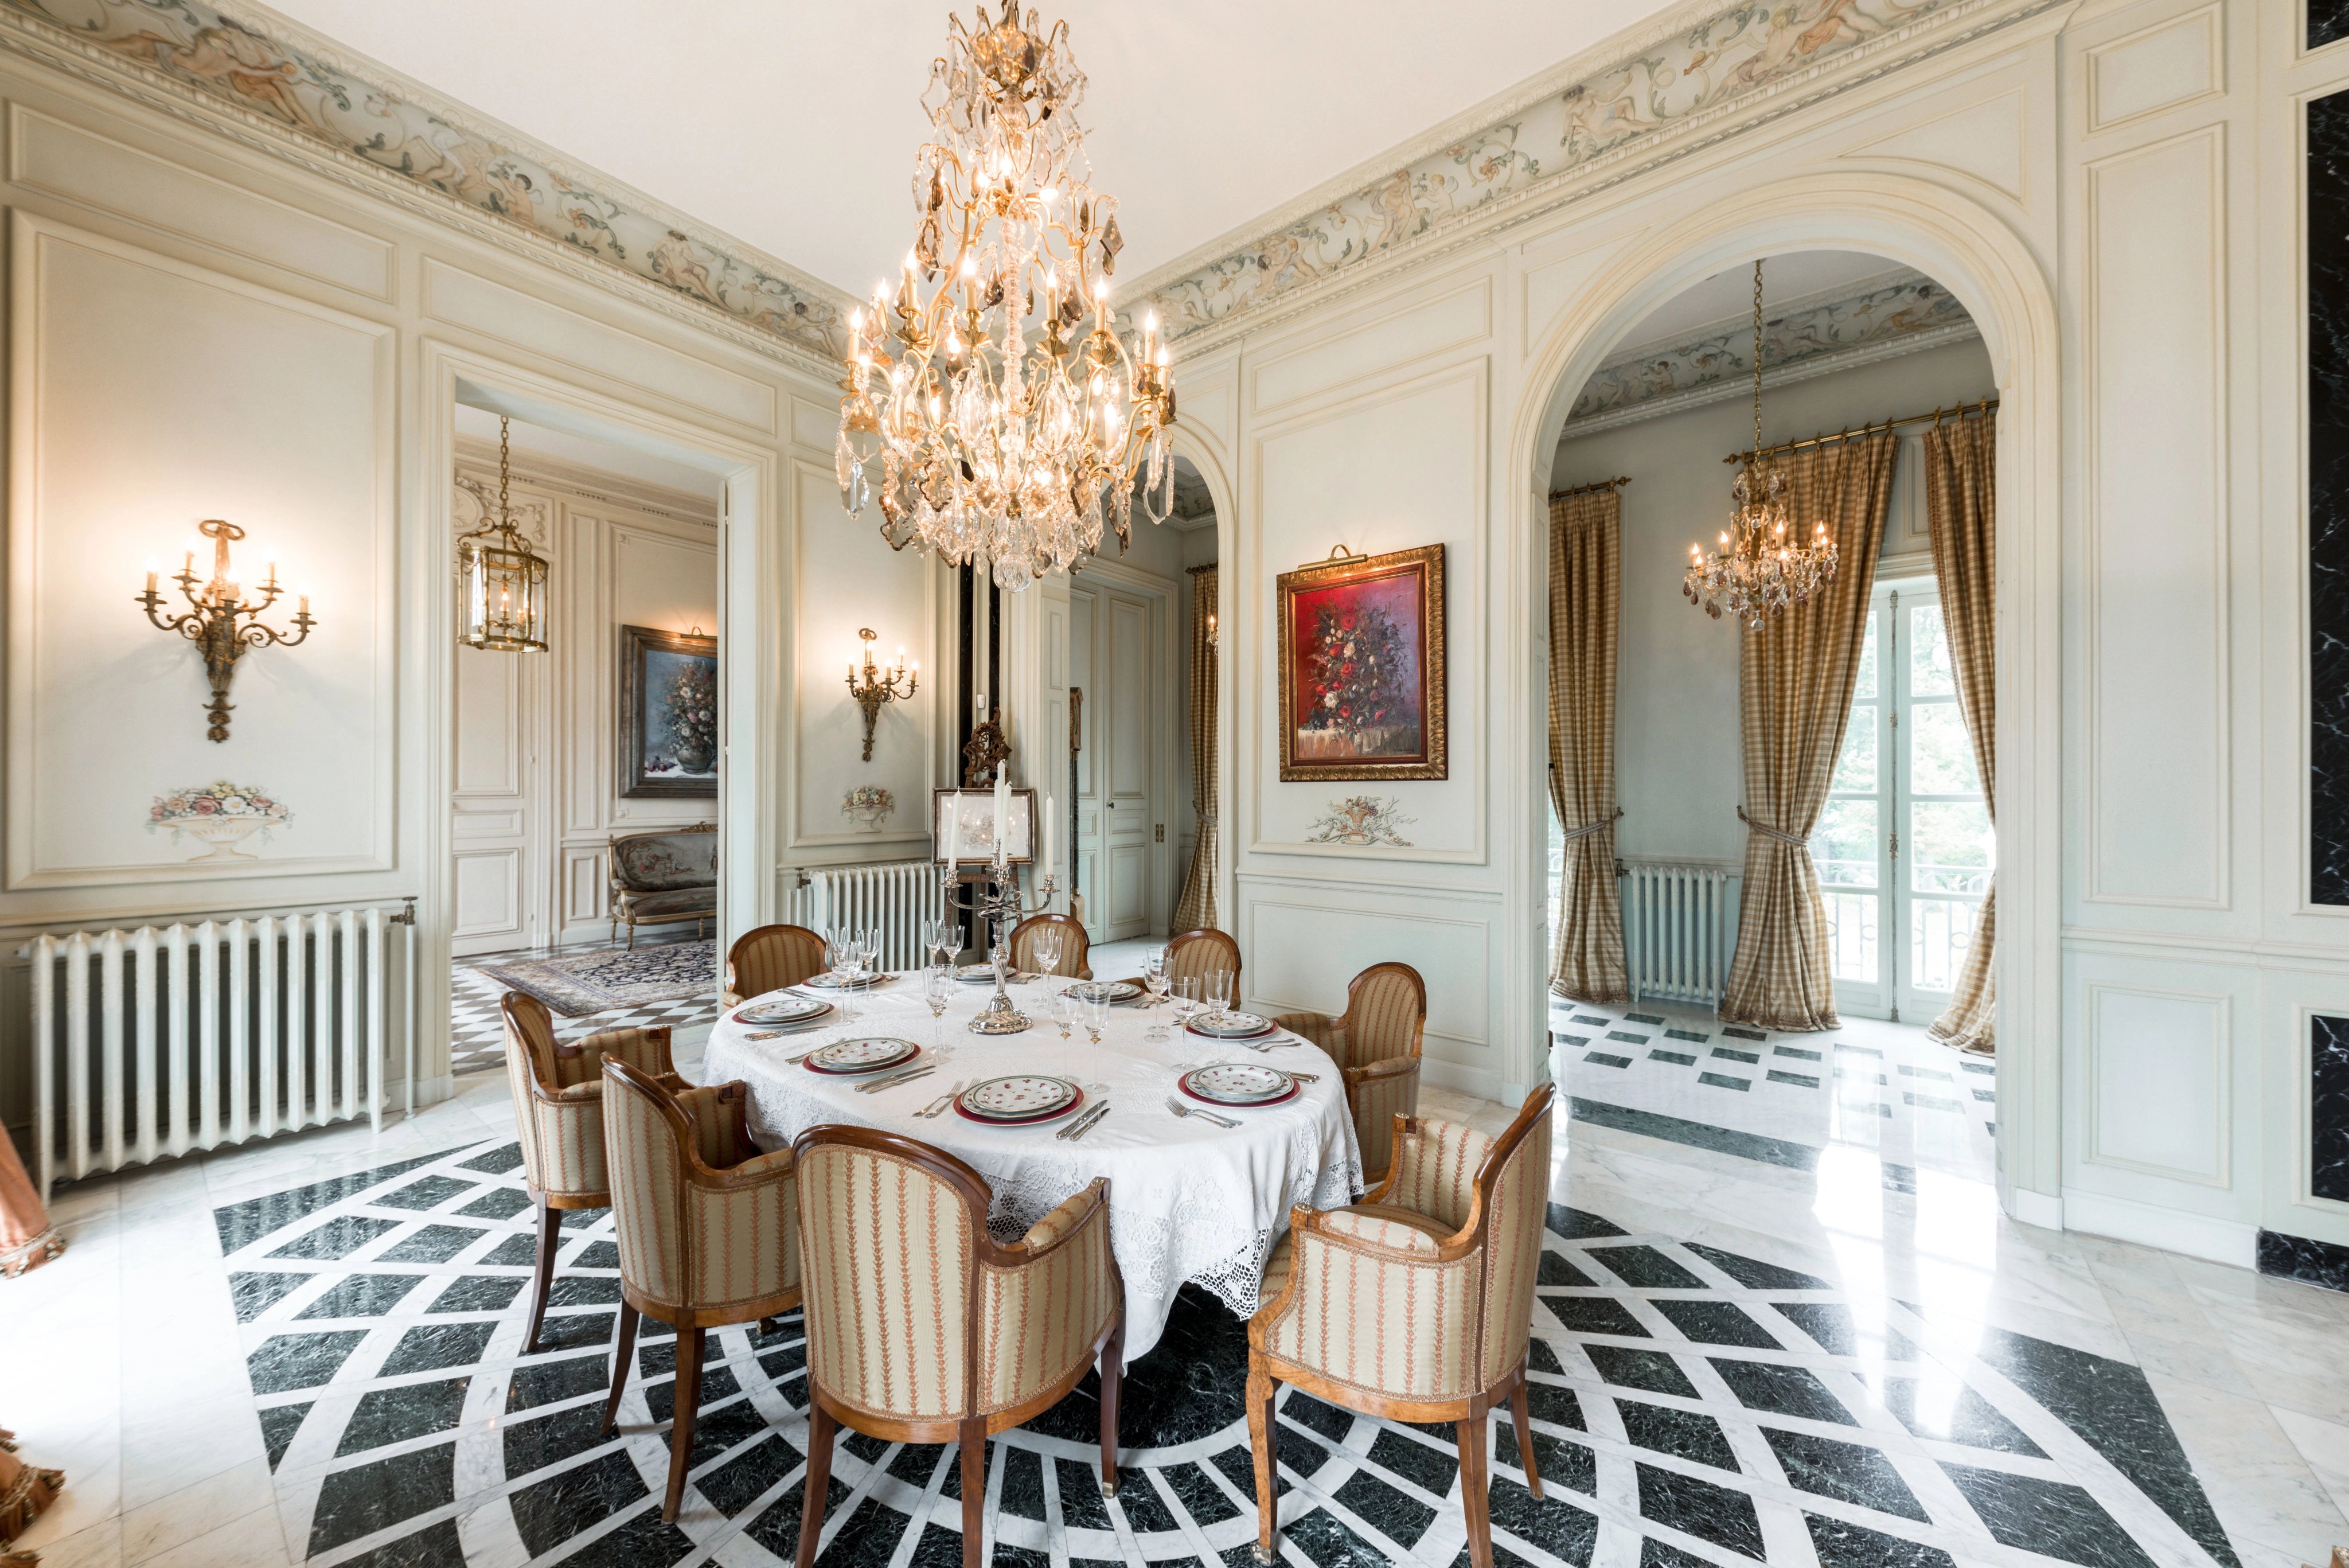 A sublime Palais inspired by Grand Trianon Palace, 20 min from Paris_1736